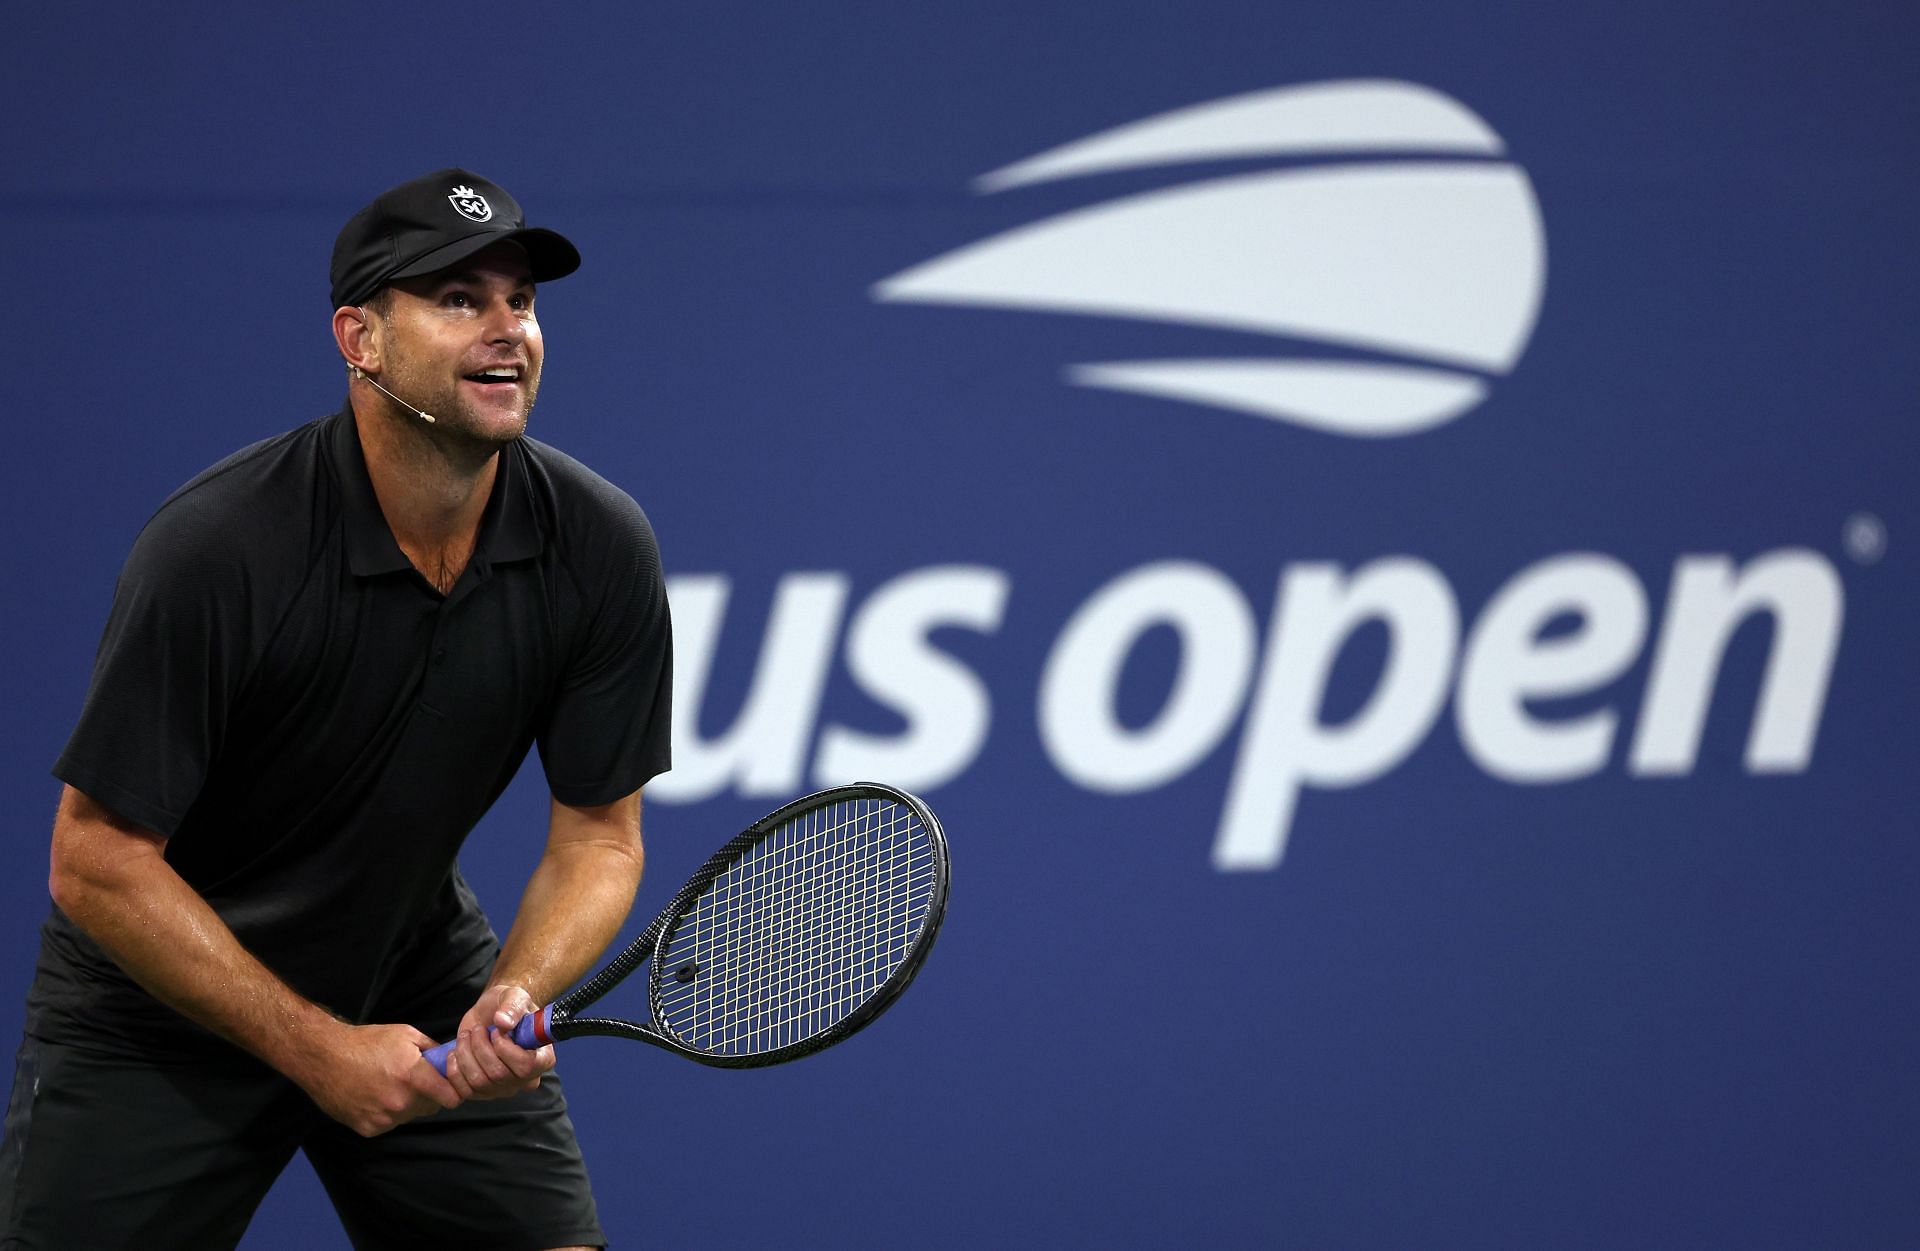 Andy Roddick during the 2022 US Open Legends match